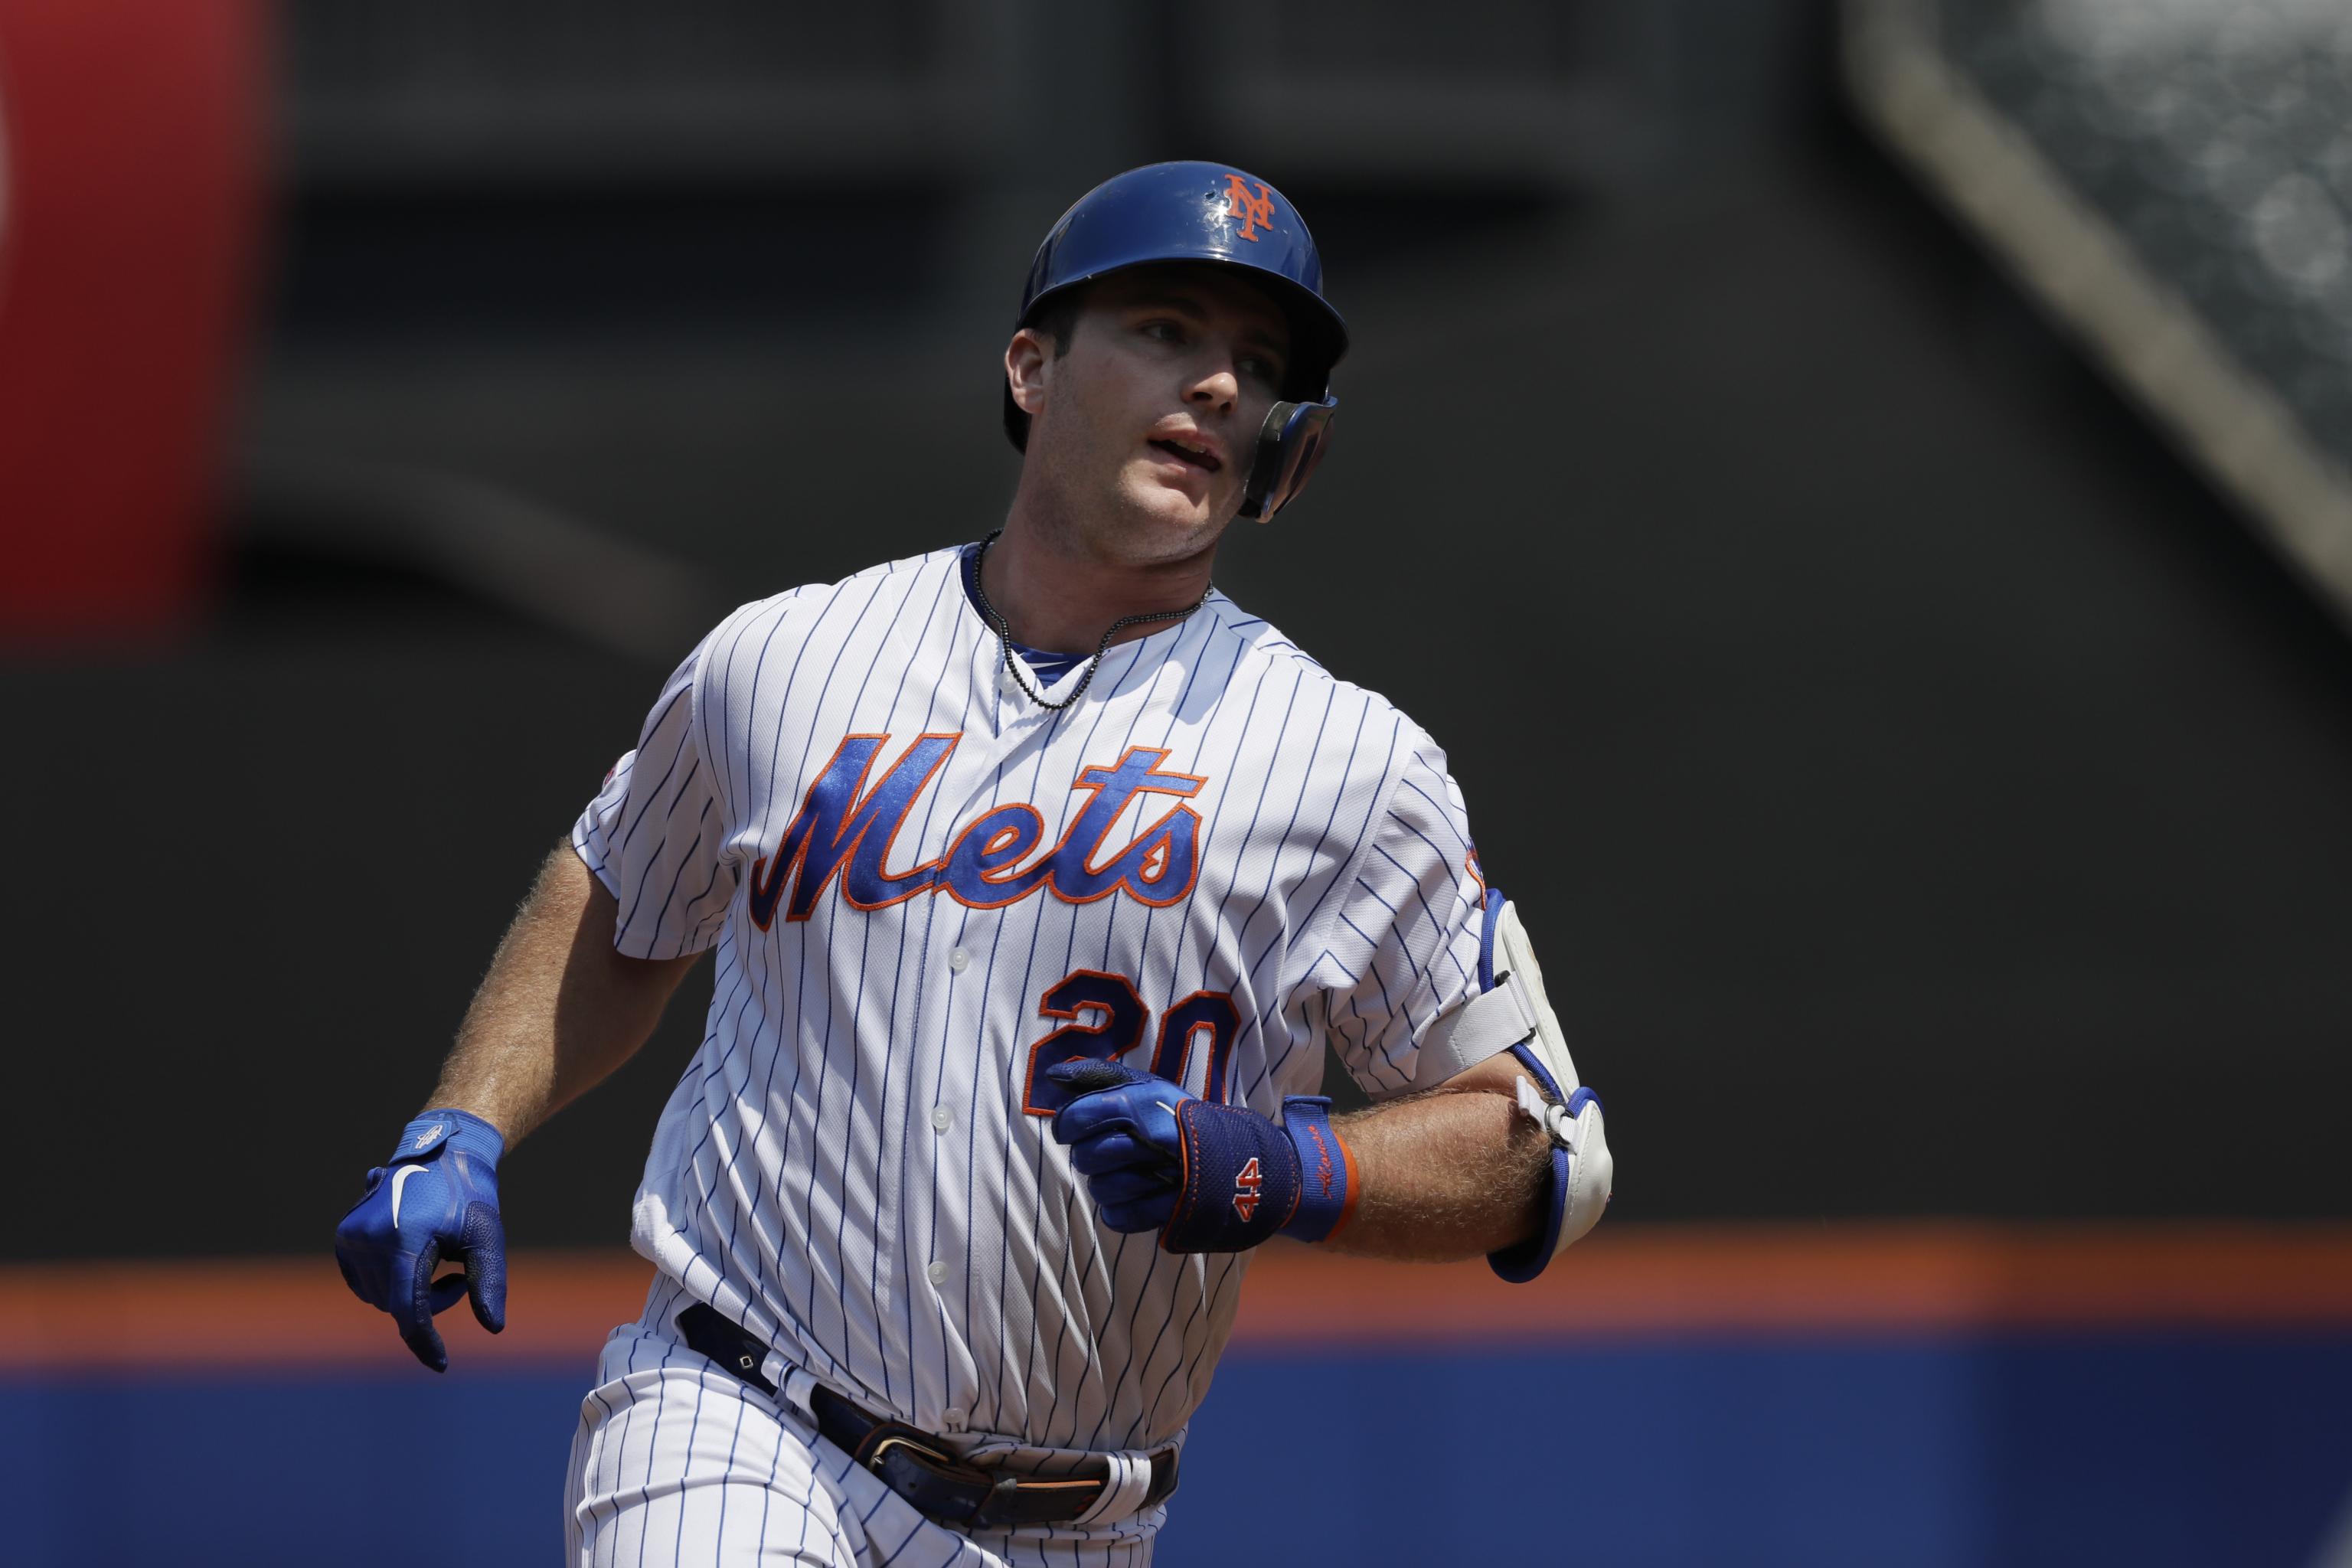 Pete Alonso breaks record for most home runs by a Mets rookie